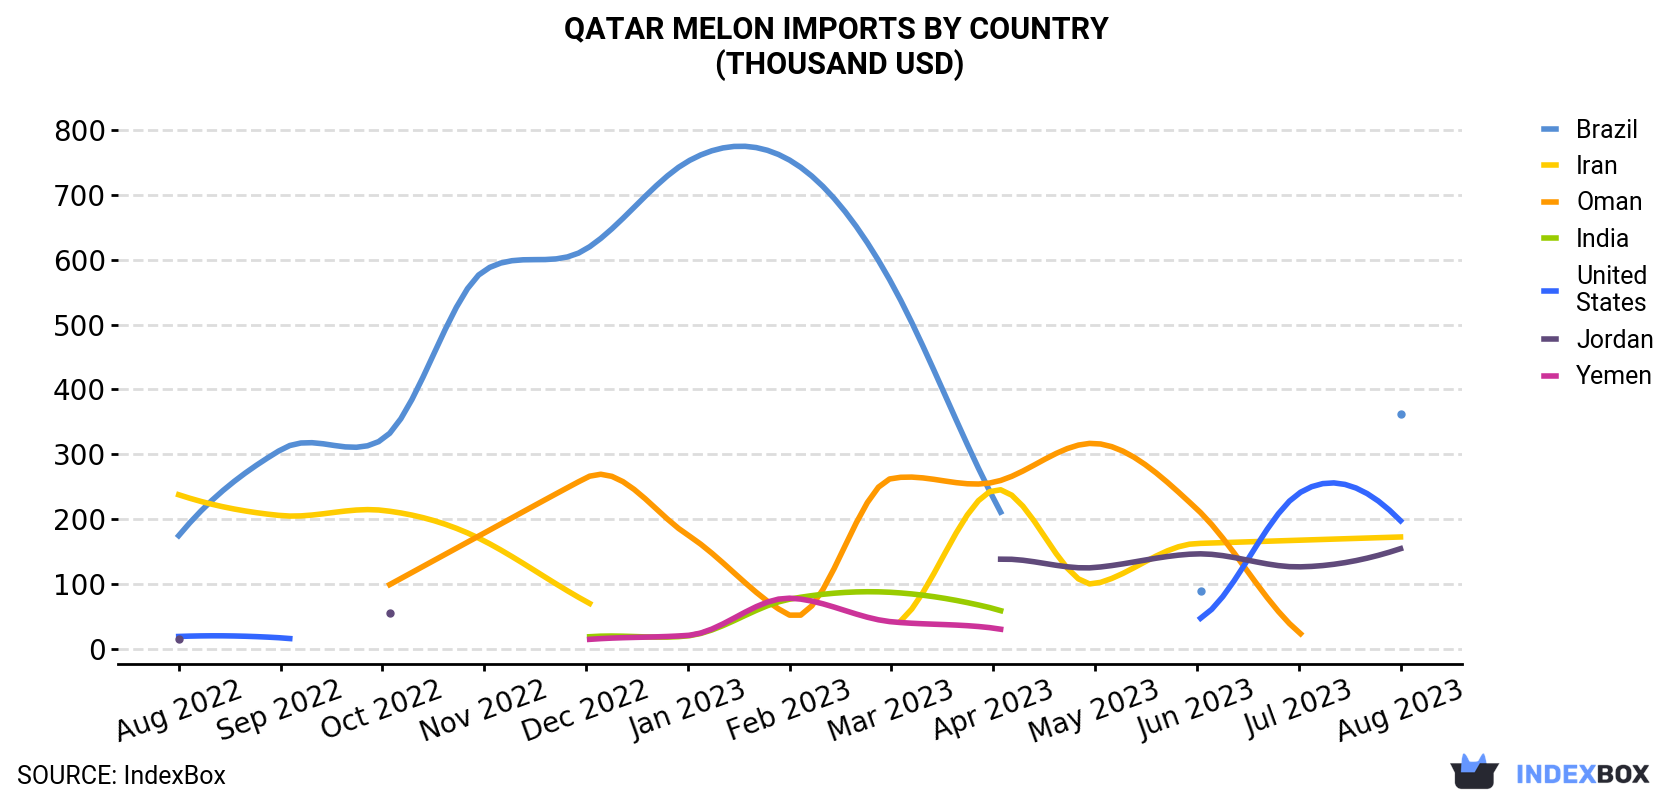 Qatar Melon Imports By Country (Thousand USD)